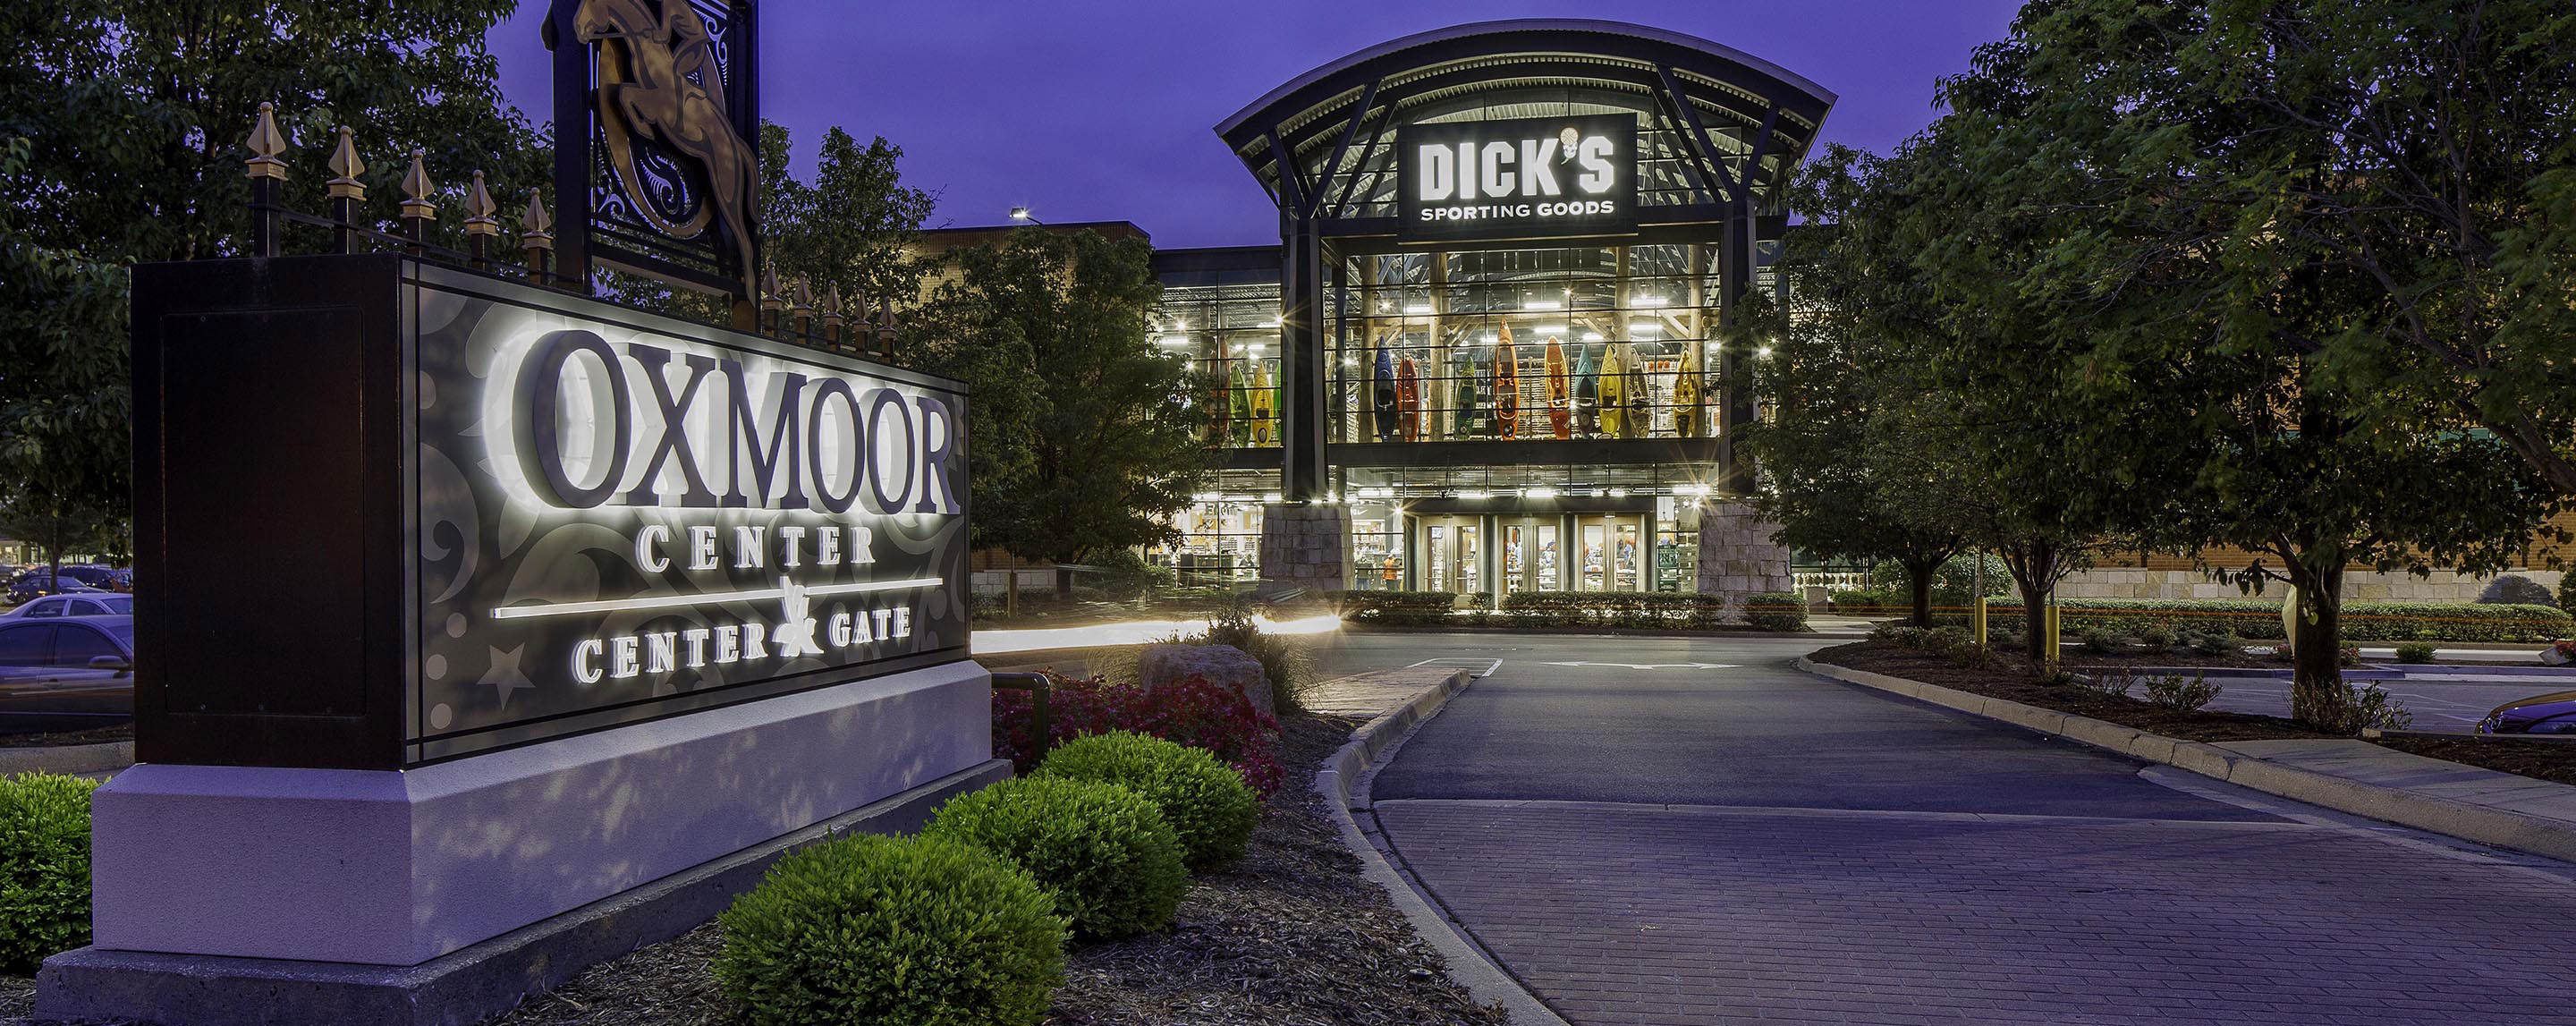 Dick's Sporting Goods retail store entrance at Oxmoor shopping center in Louisville